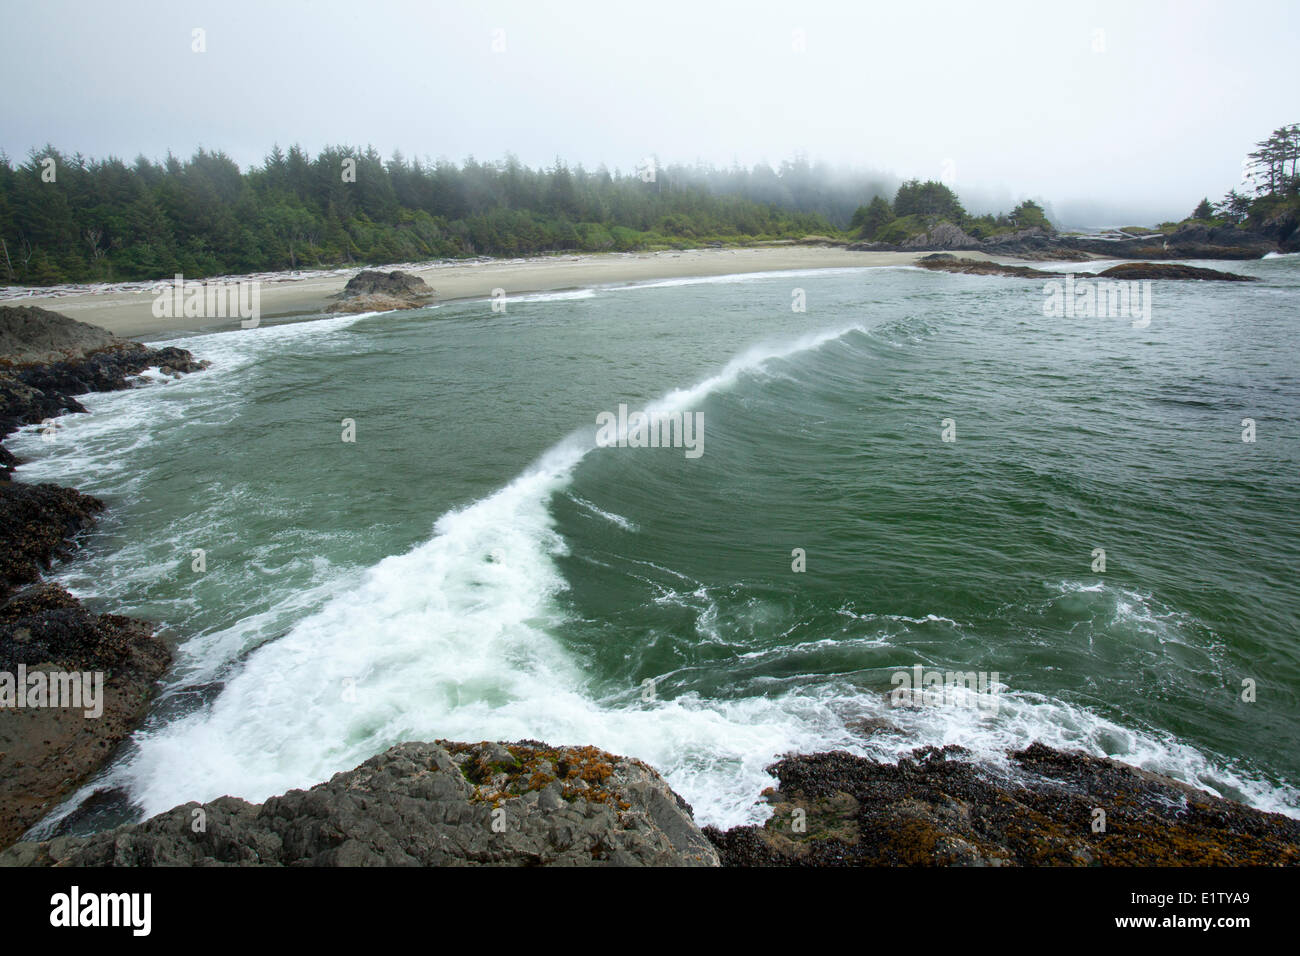 Waves swell up at the scenic Radar Beaches in Pacific Rim National Park near Tofino British Columbia Canada on Vancouver Island Stock Photo